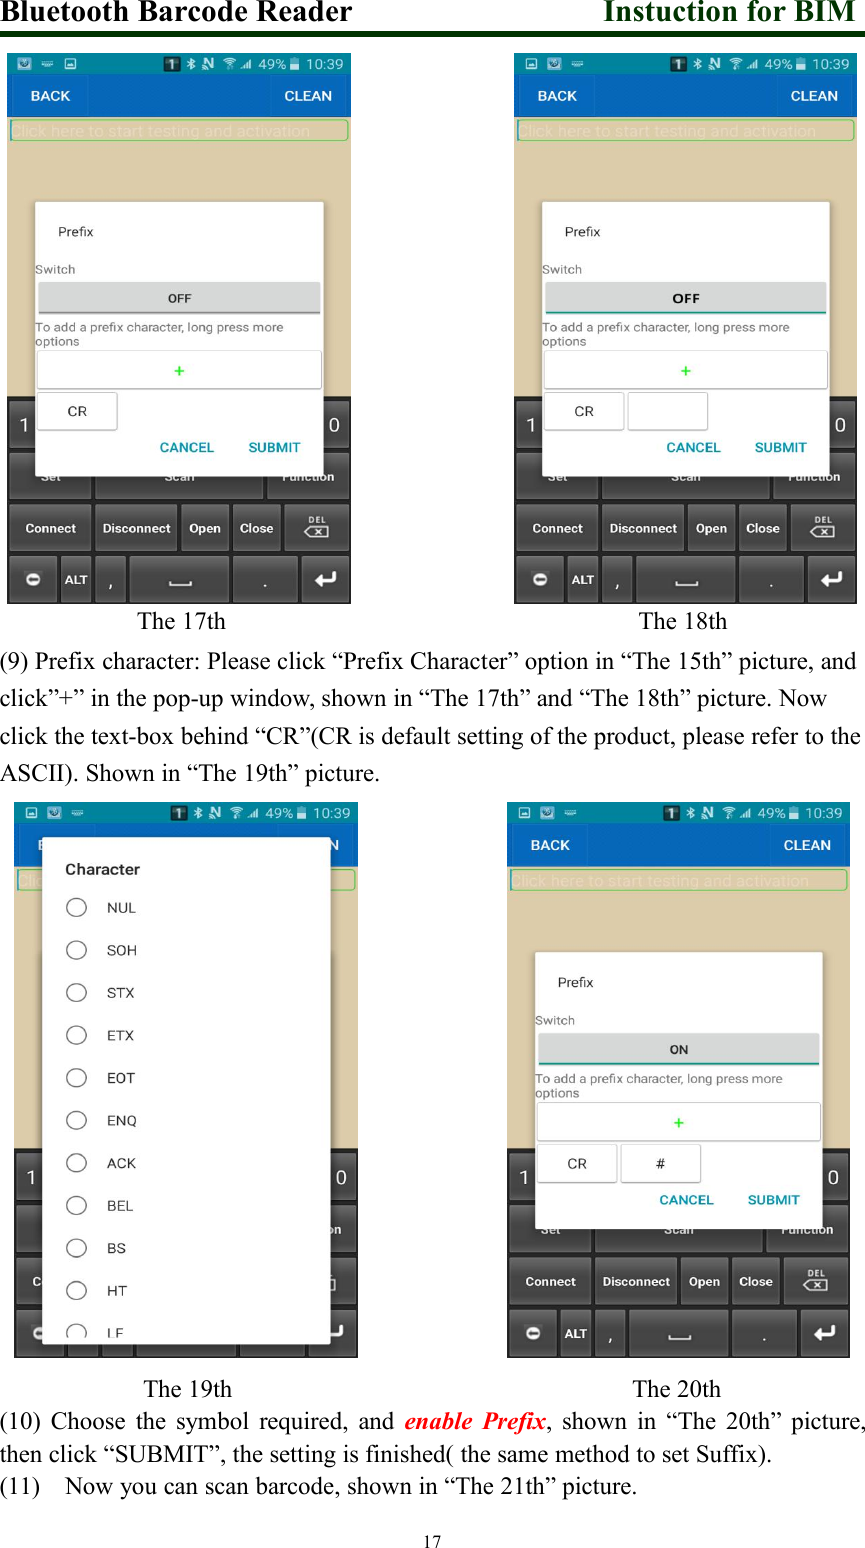 Bluetooth Barcode Reader Instuction for BIM17The 17th The 18th(9) Prefix character: Please click “Prefix Character” option in “The 15th” picture, andclick”+” in the pop-up window, shown in “The 17th” and “The 18th” picture. Nowclick the text-box behind “CR”(CR is default setting of the product, please refer to theASCII). Shown in “The 19th” picture.The 19th The 20th(10) Choose the symbol required, and enable Prefix, shown in “The 20th” picture,then click “SUBMIT”, the setting is finished( the same method to set Suffix).(11) Now you can scan barcode, shown in “The 21th” picture.